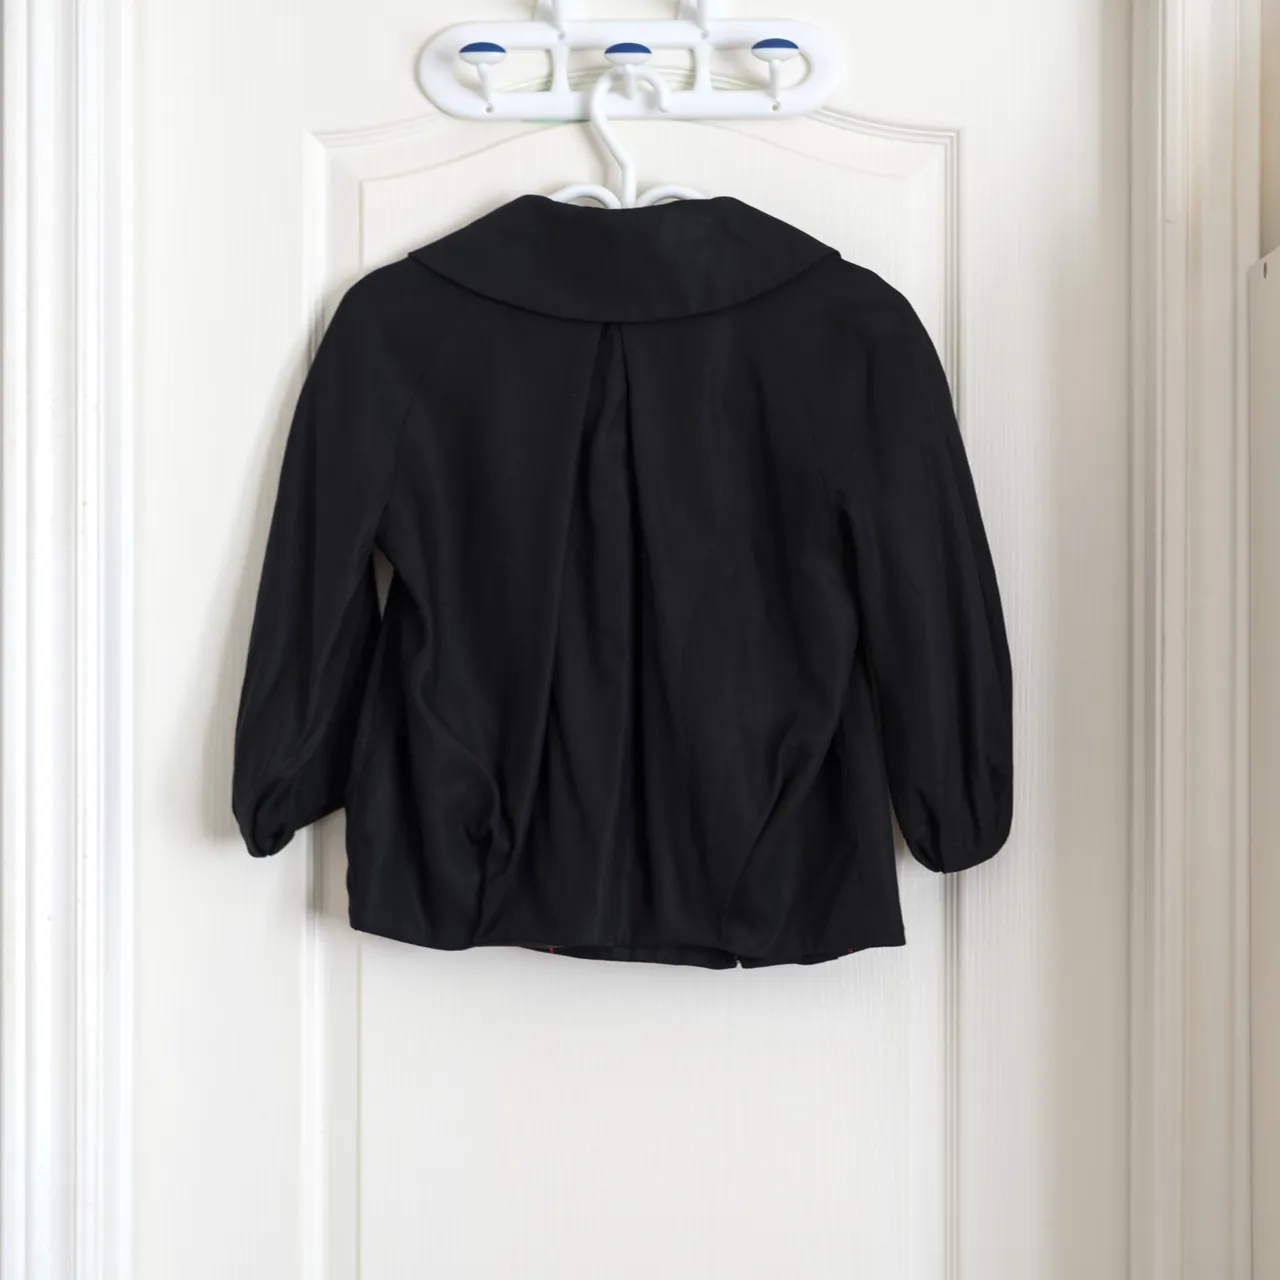 Marc by Marc Jacobs Cropped Black Jacket photo 4